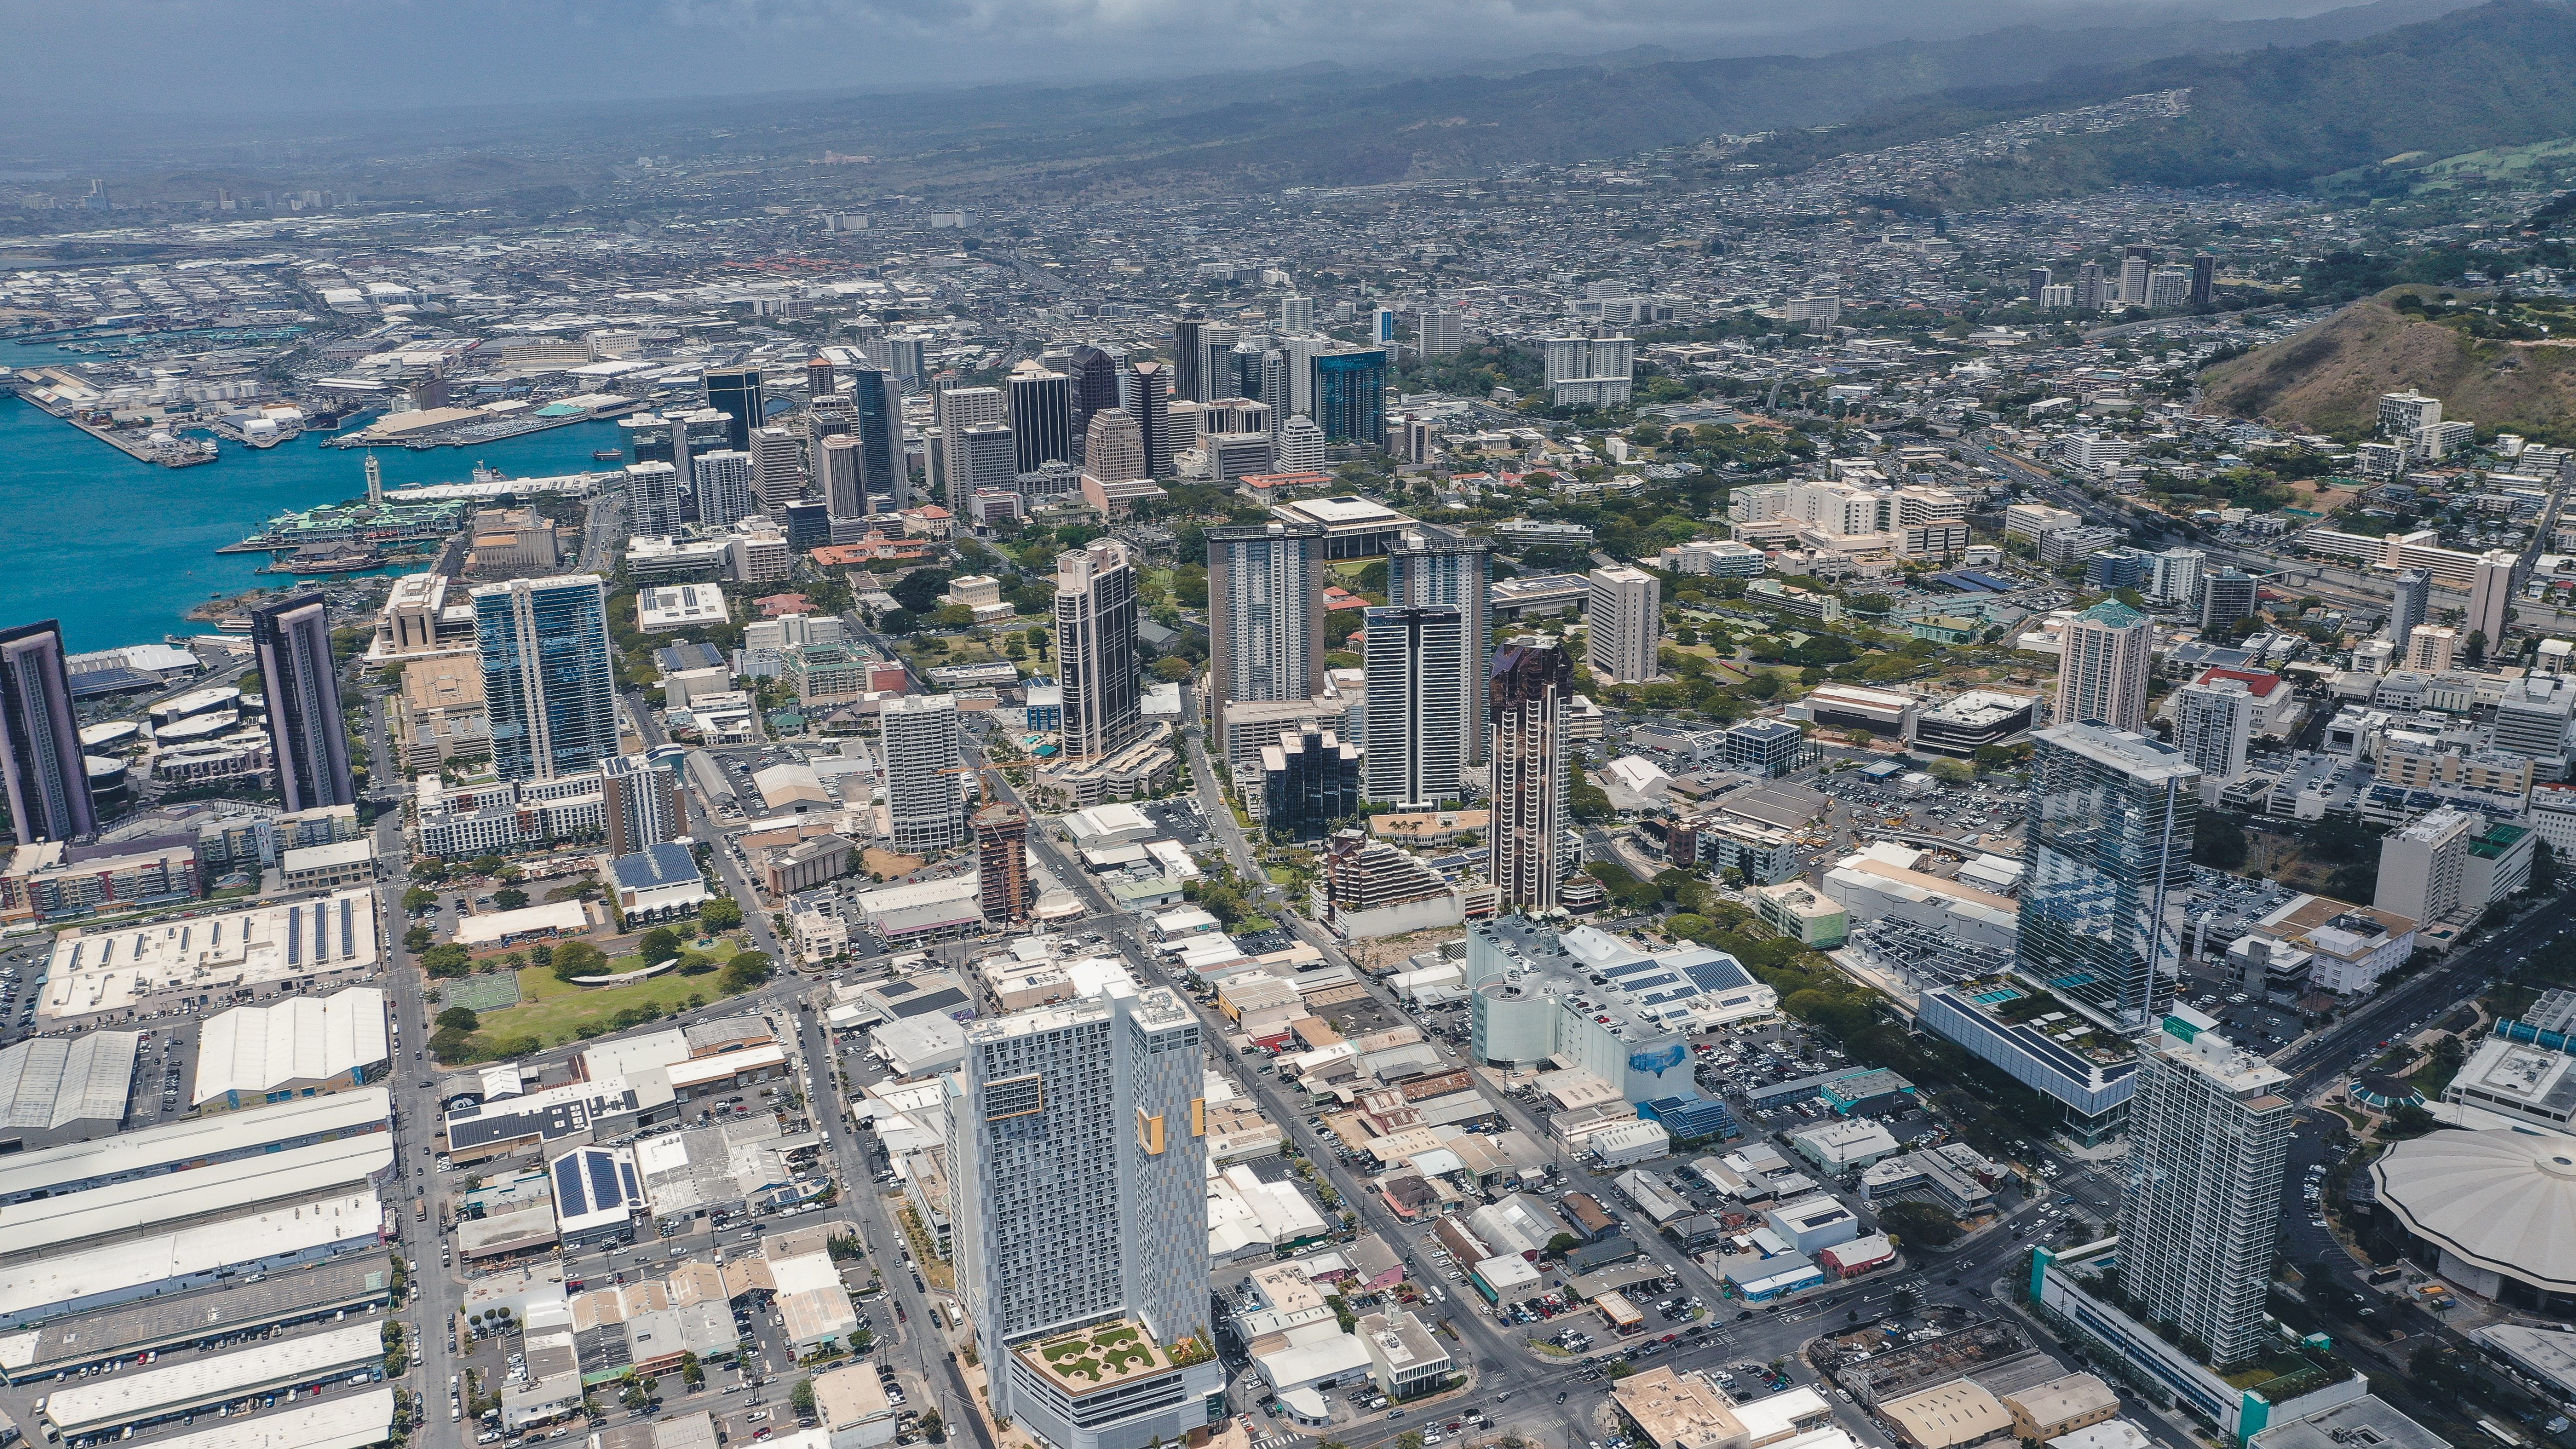 Downtown Honolulu from the Air